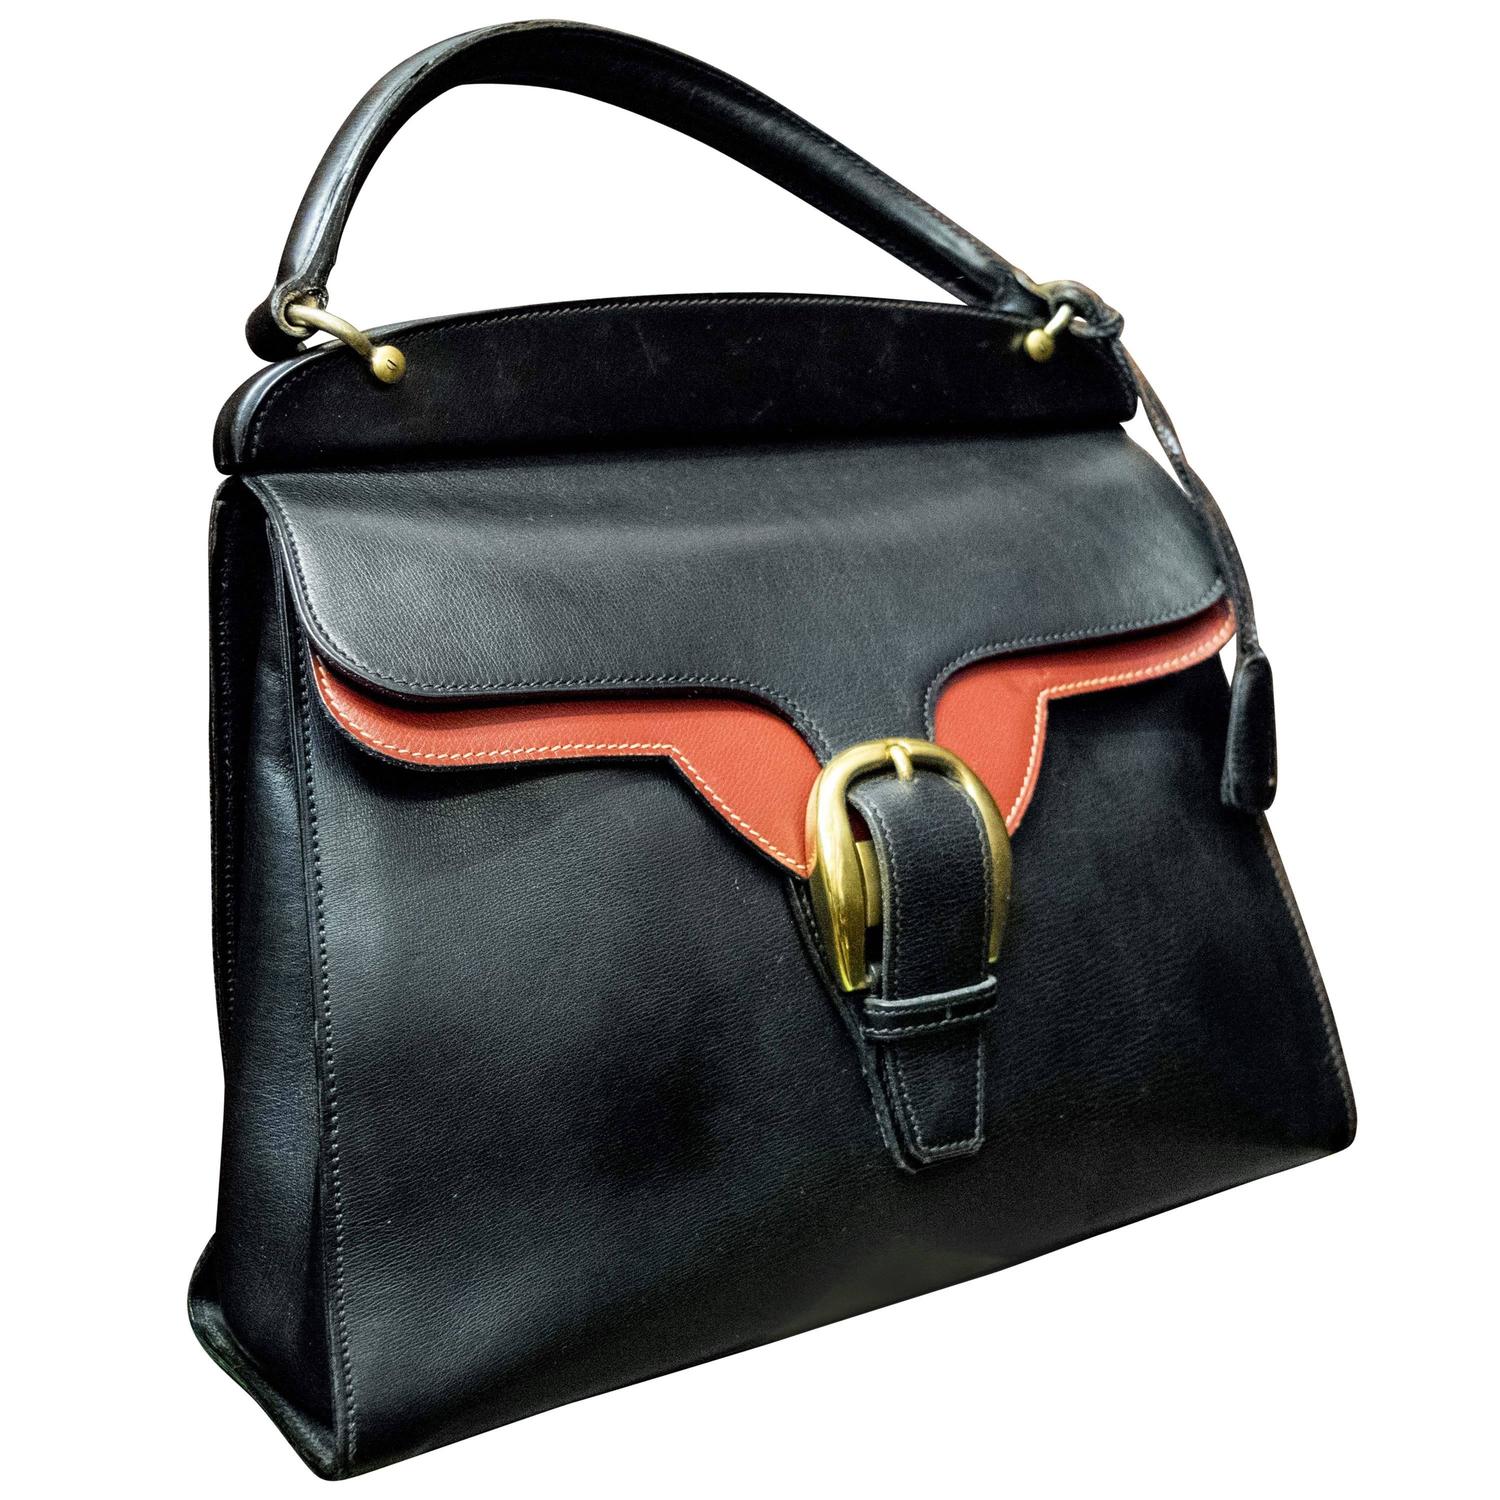 1950s Gucci Black and Red Leather Handbag For Sale at 1stdibs